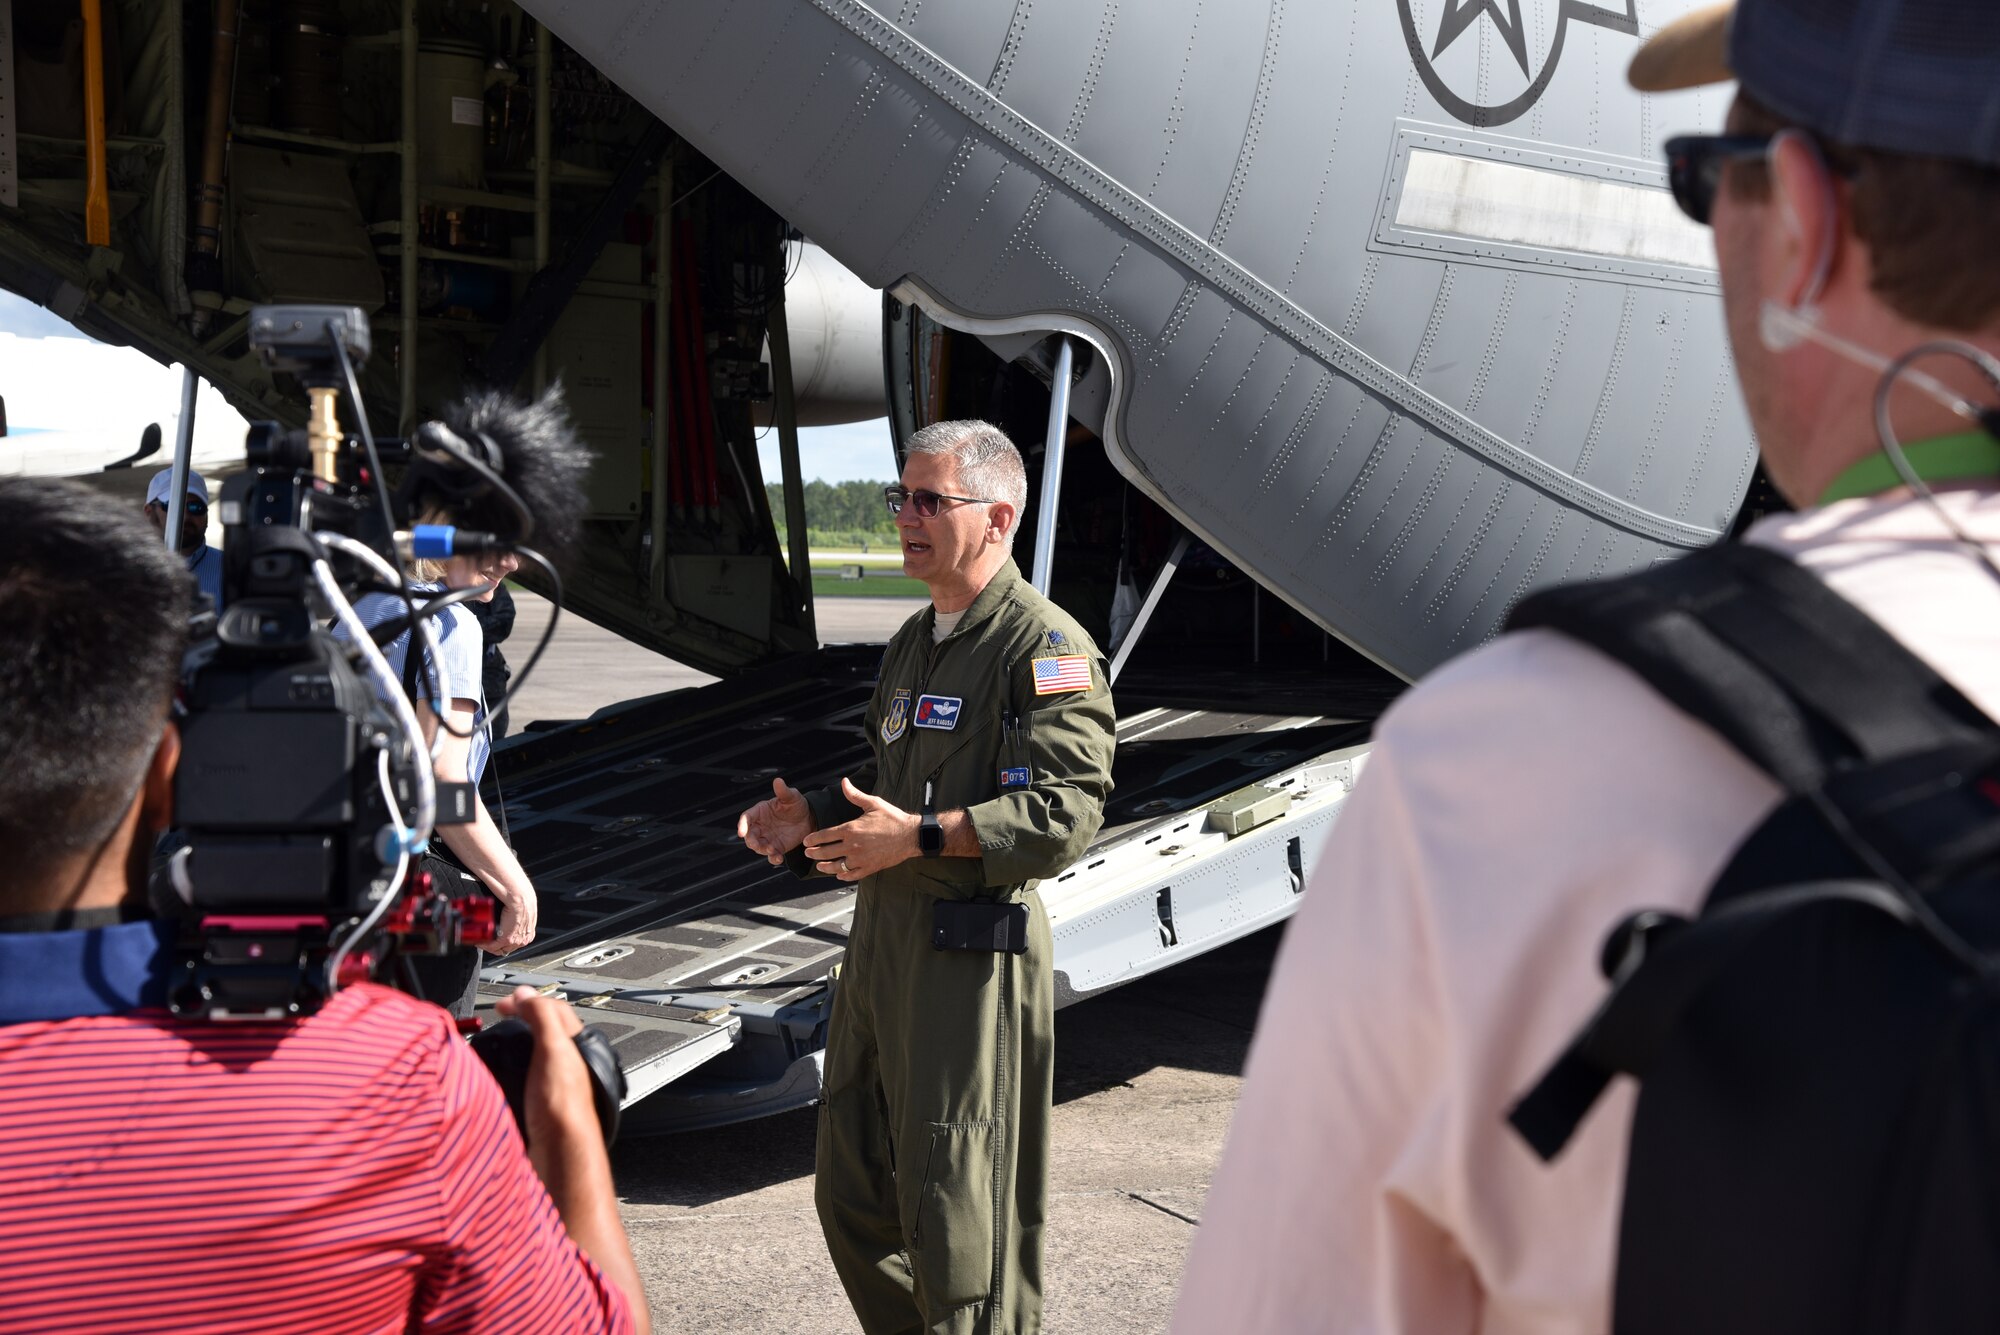 Lt. Col. Jeff Ragusa, 53rd Weather Reconnaissance Squadron chief pilot, explains the capabilities of the WC-130J Super Hercules during a media tour of the aircraft May 10, 2019, in Brunswick, Georgia. Media tours were given during the Hurricane Awareness Tour to help create a weather-ready nation by raising awareness for the upcoming hurricane season occurring June 1-Nov. 30, with emphasis this year on raising awareness about inland flooding. (U.S. Air Force photo by Tech. Sgt. Christopher Carranza)